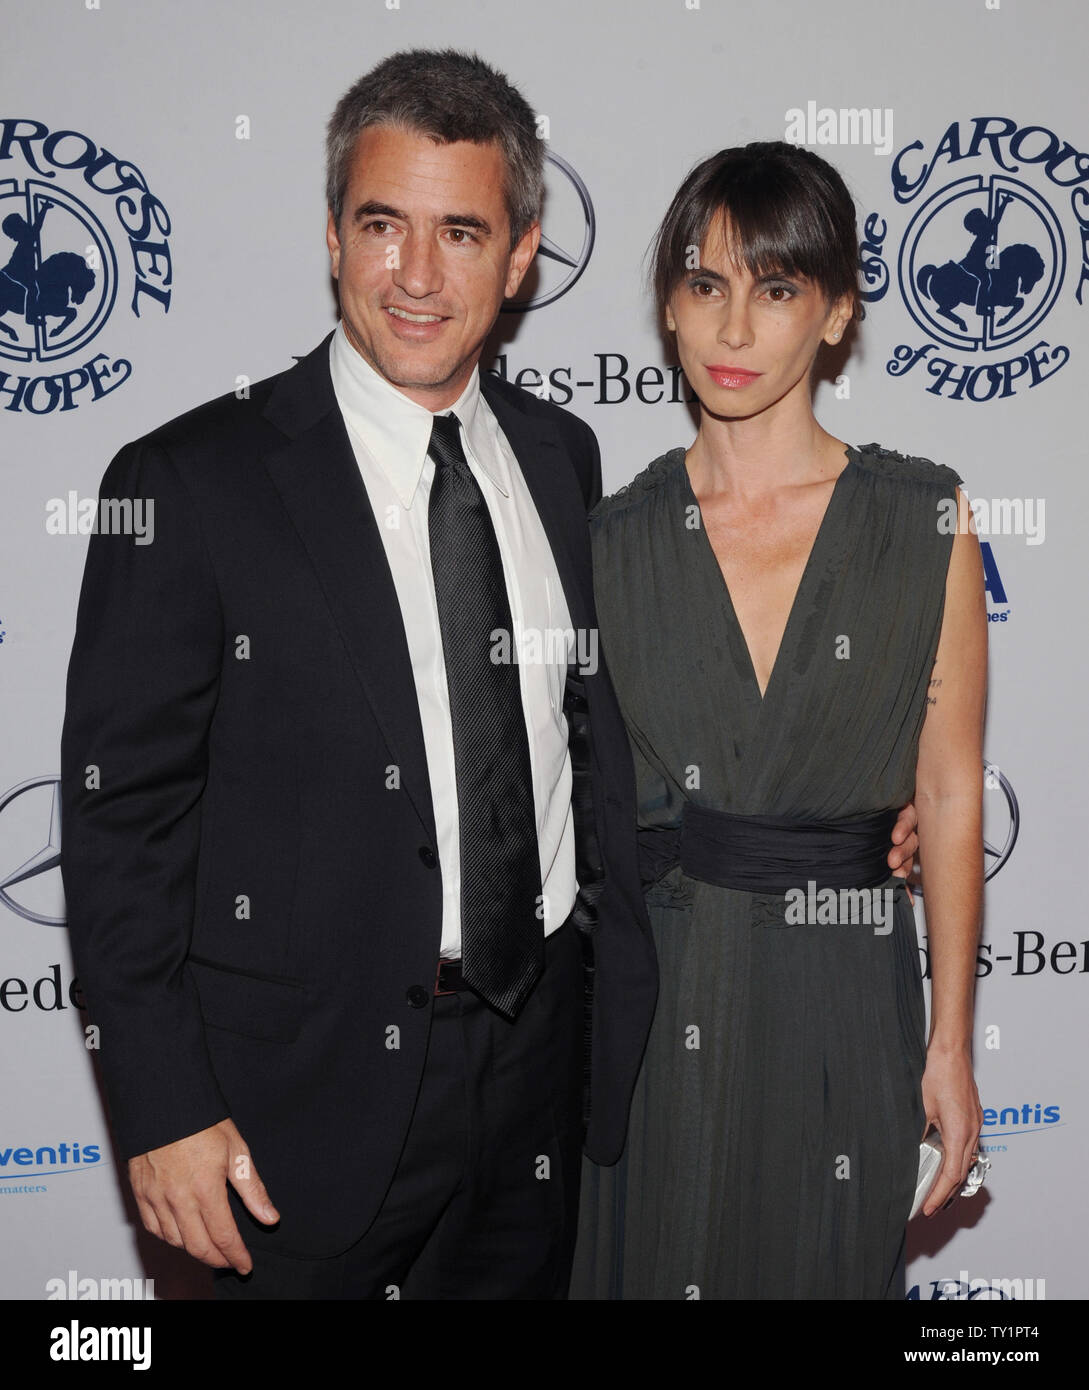 Actor Dermott Mulroney and a guest arrive at the 32nd anniversary Carousel of Hope Ball in Beverly Hills, California on October 23, 2010. The ball benefits The Barbara Davis Center for Childhood Diabetes.   UPI/Jim Ruymen Stock Photo